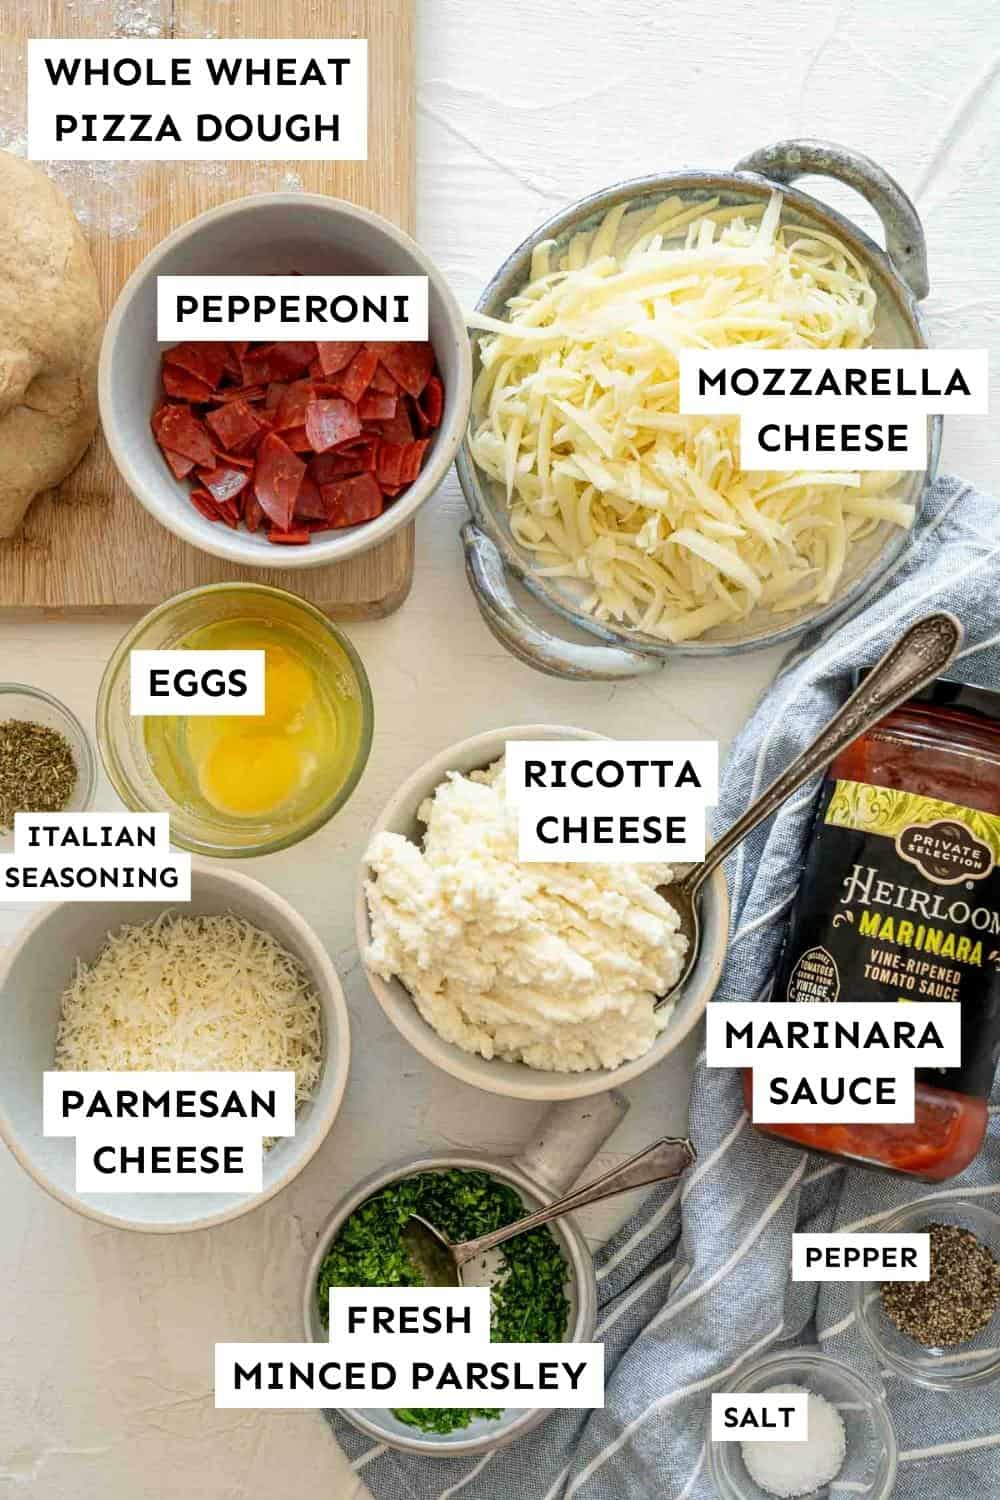 Ingredients measure out and labeled for Pepperoni Calzones.